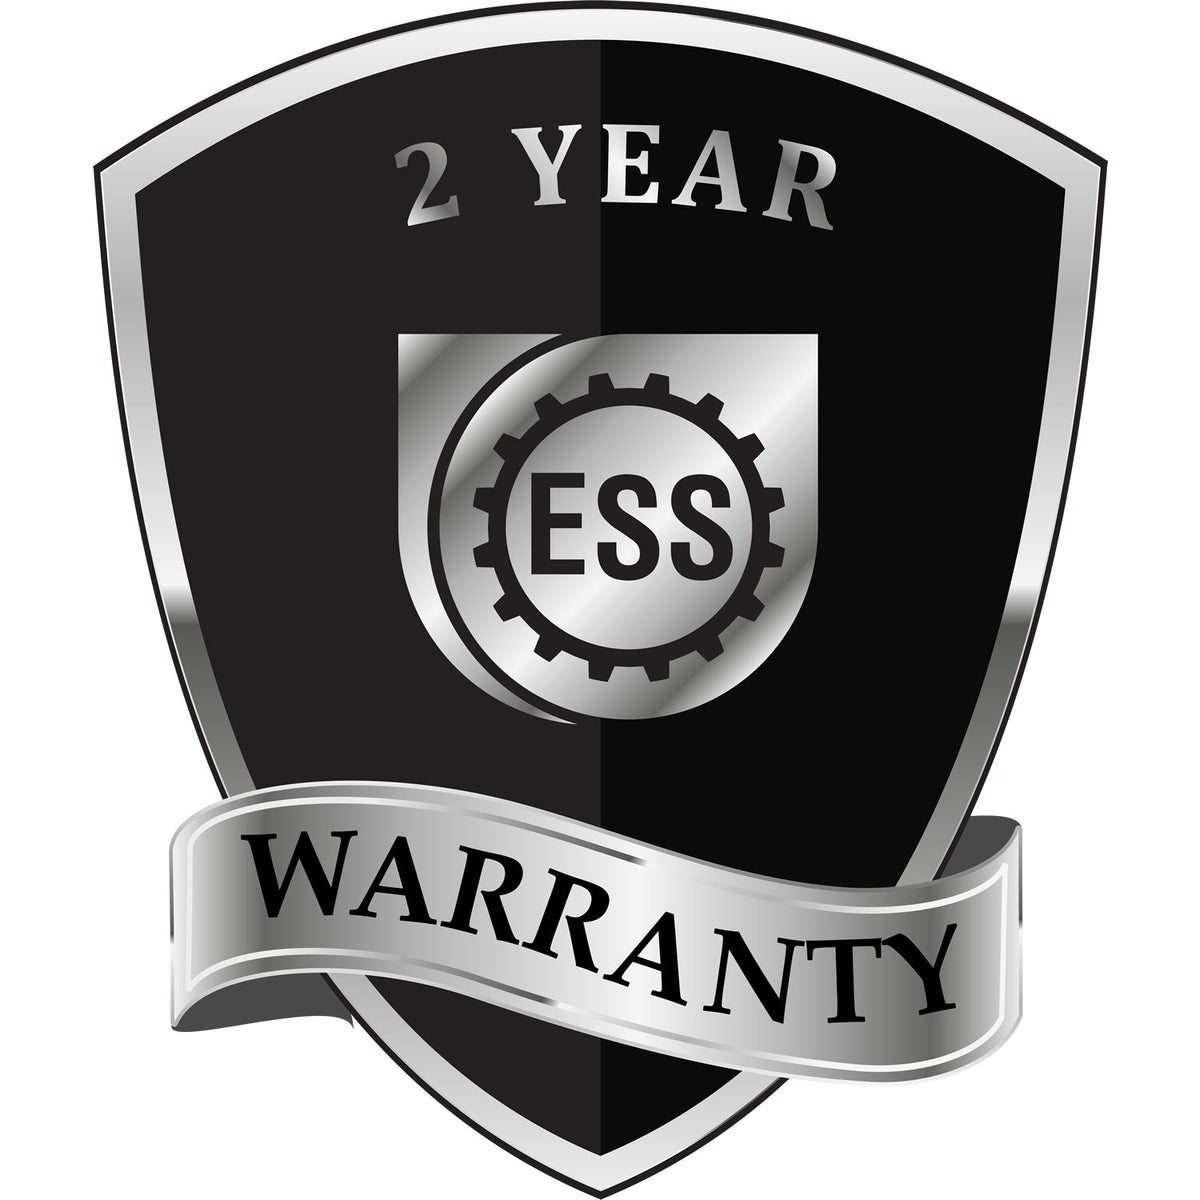 A badge or emblem showing a warranty icon for the Long Reach Arizona Land Surveyor Seal